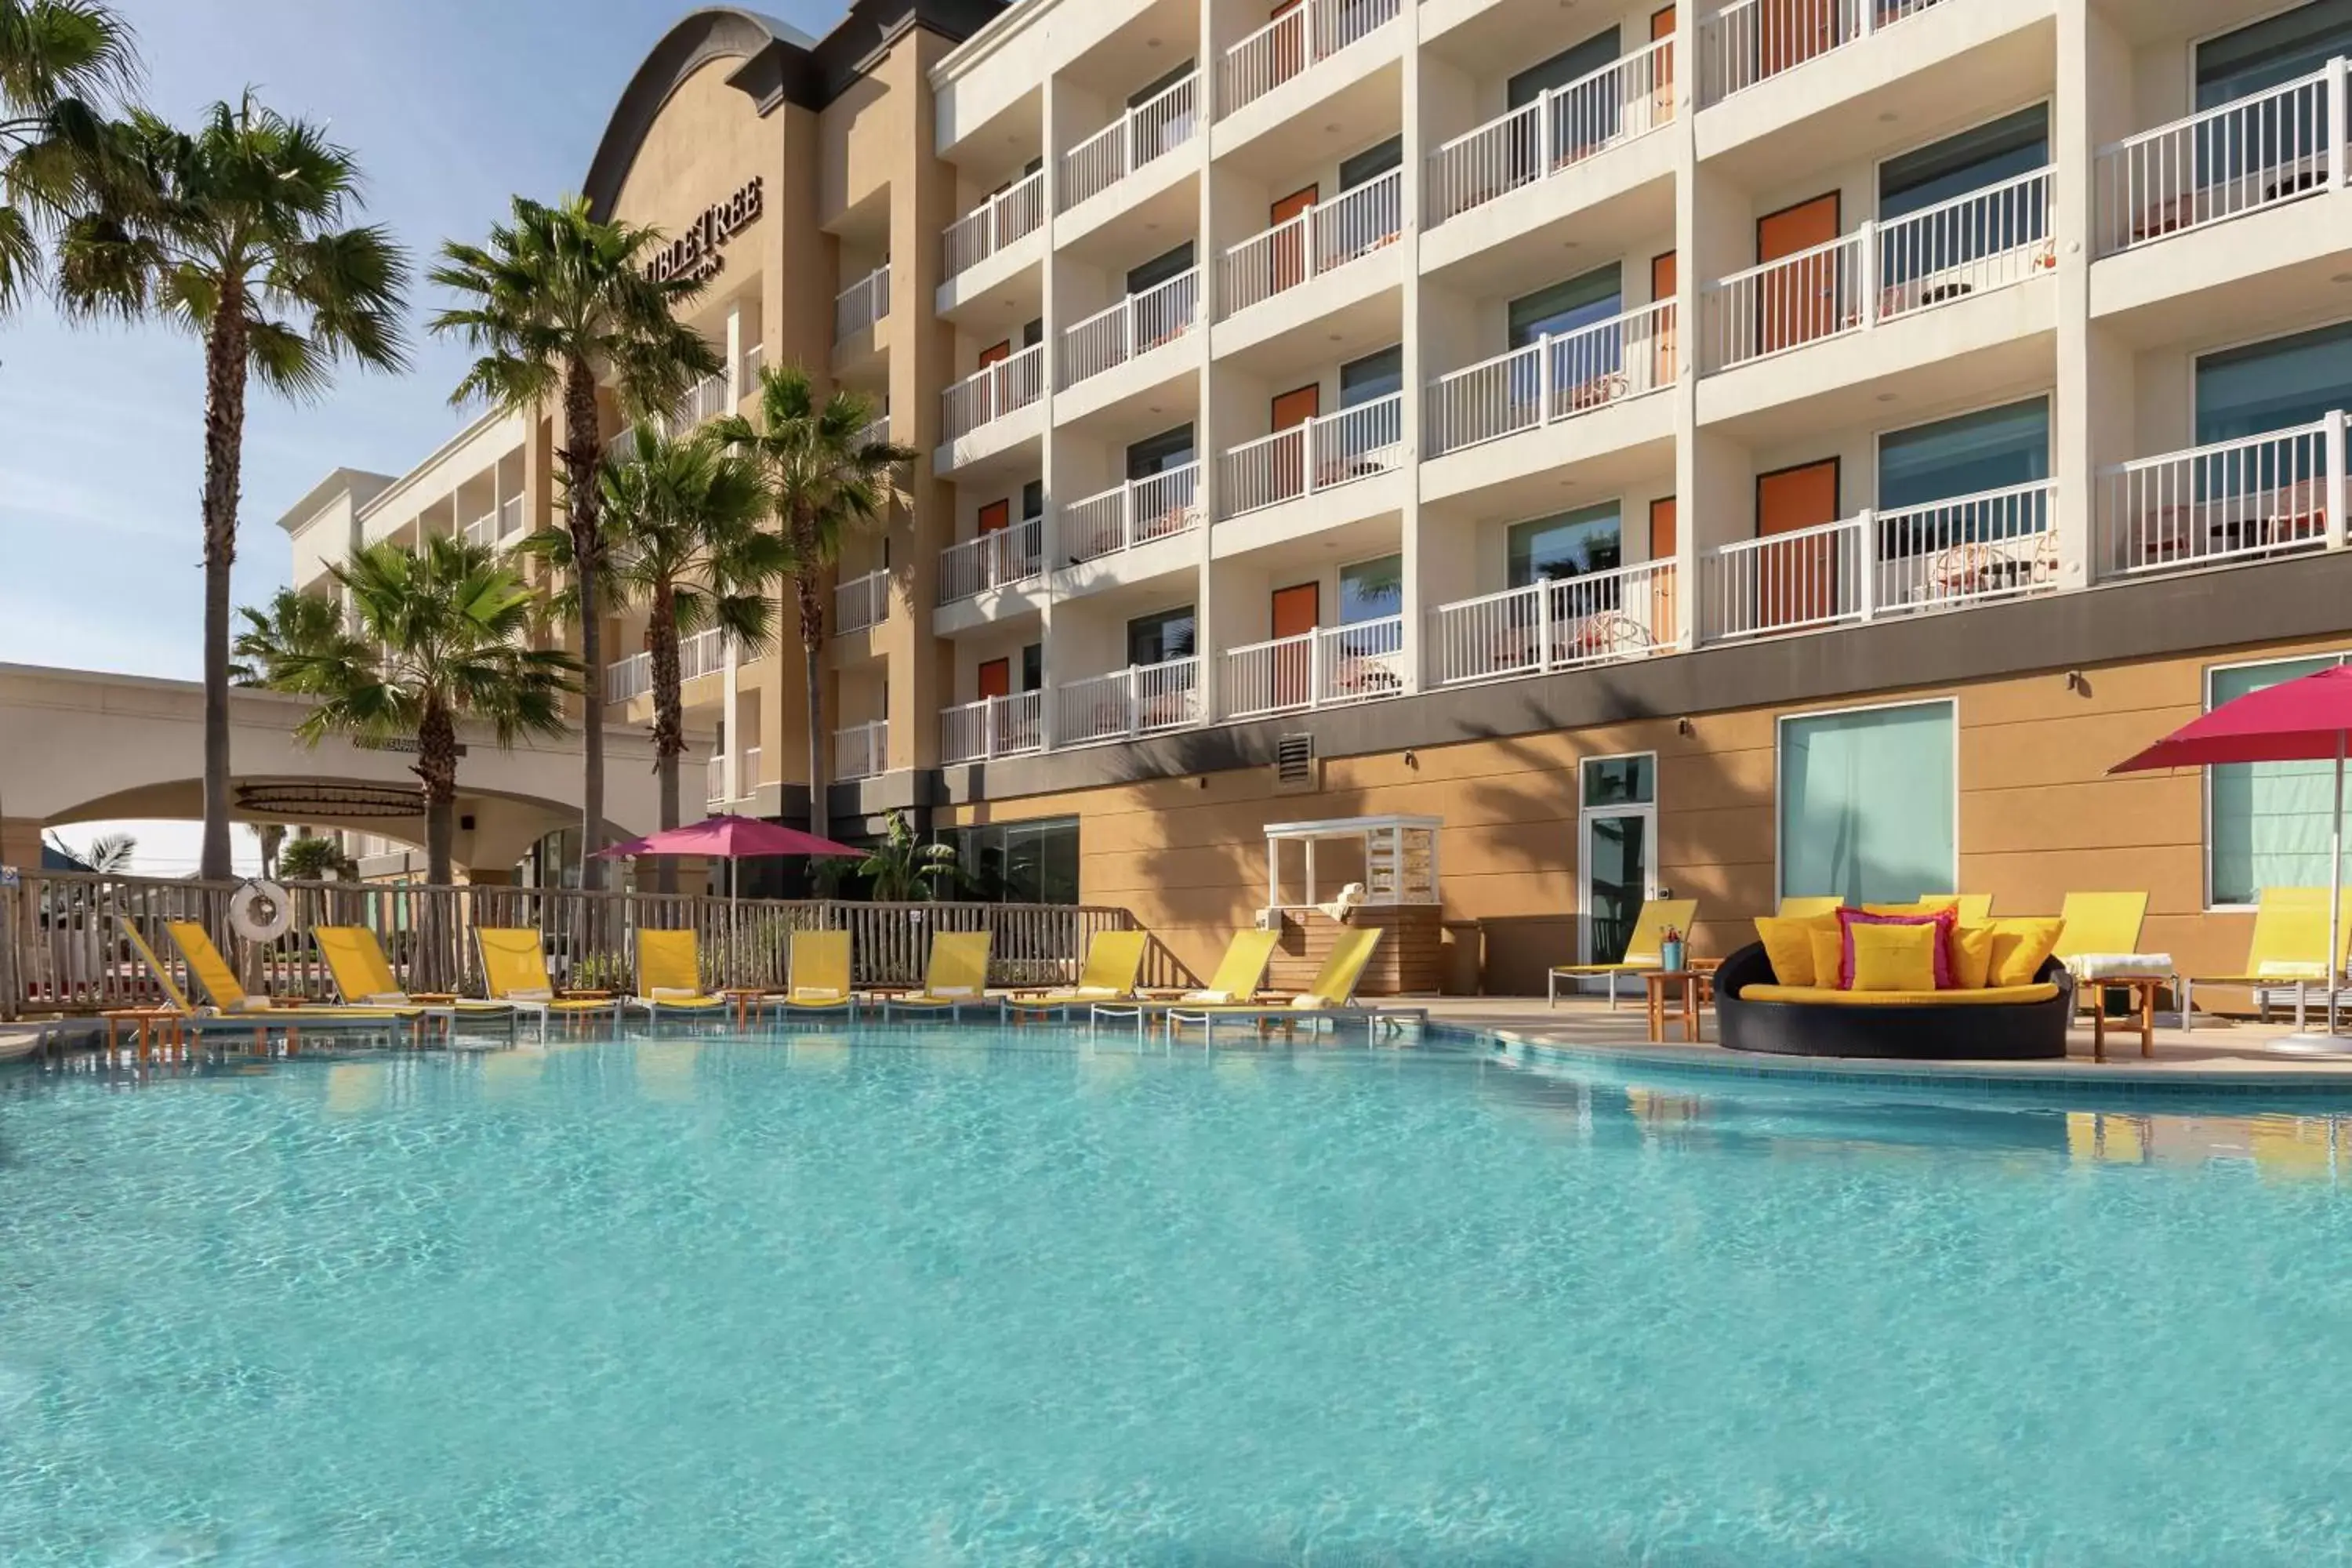 Property building, Swimming Pool in DoubleTree by Hilton Galveston Beach